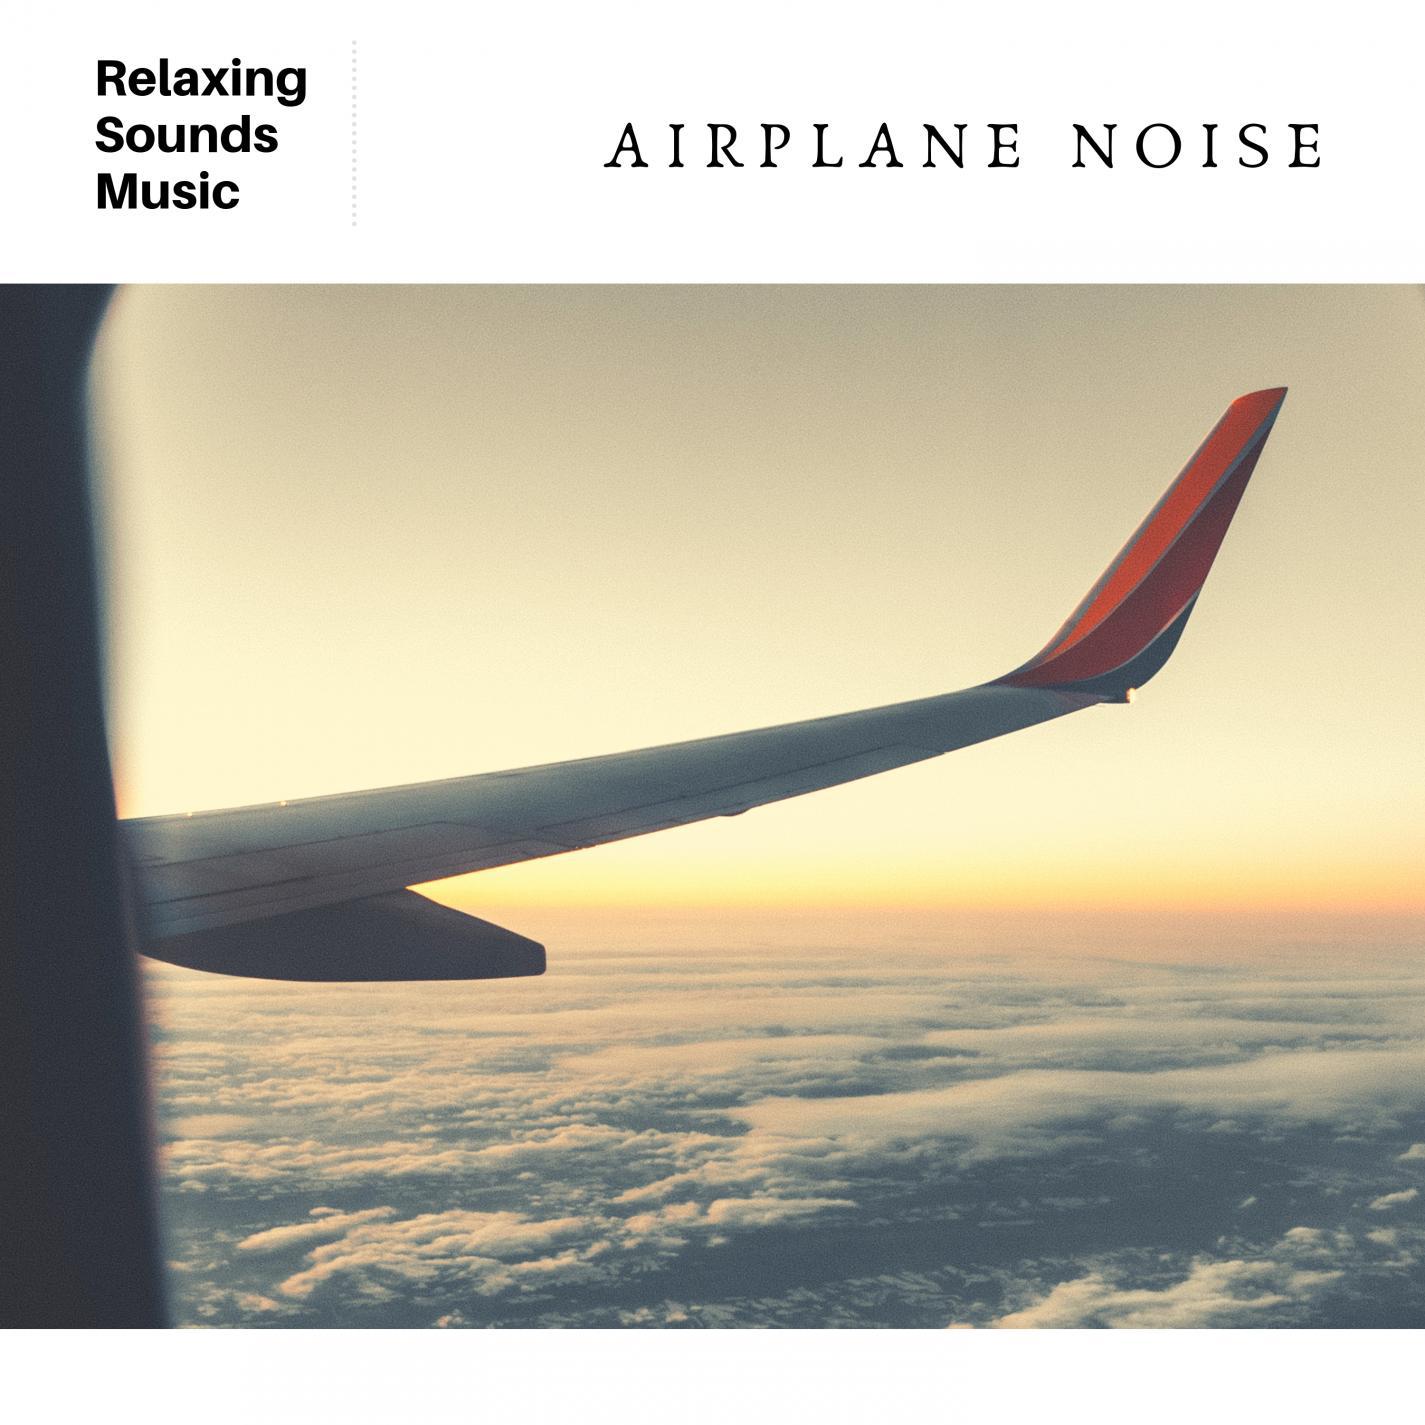 Low Airplane Flight Sounds